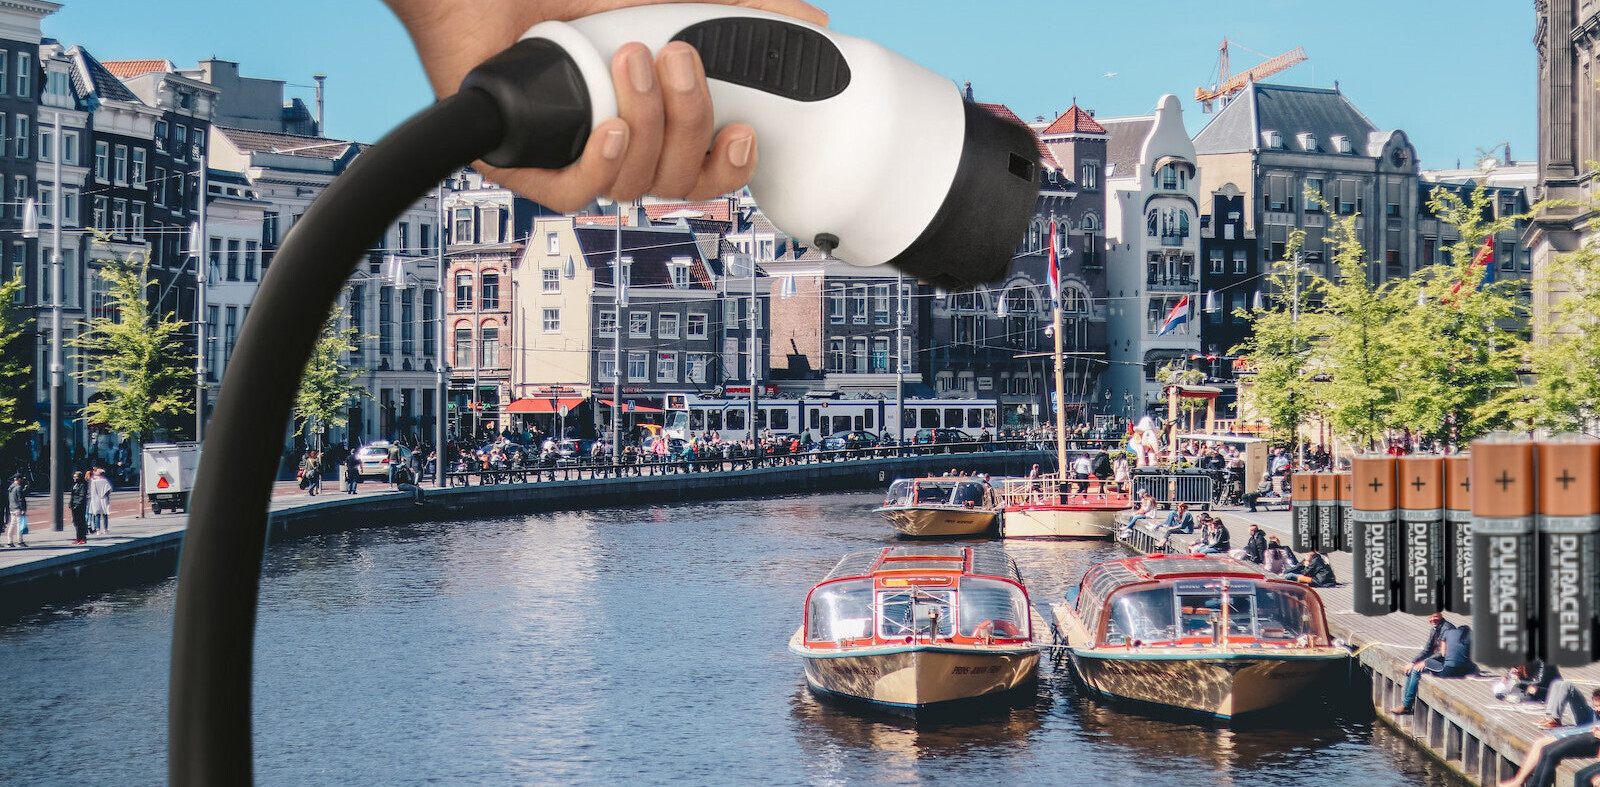 Almost all Amsterdam’s commercial boats are now electric